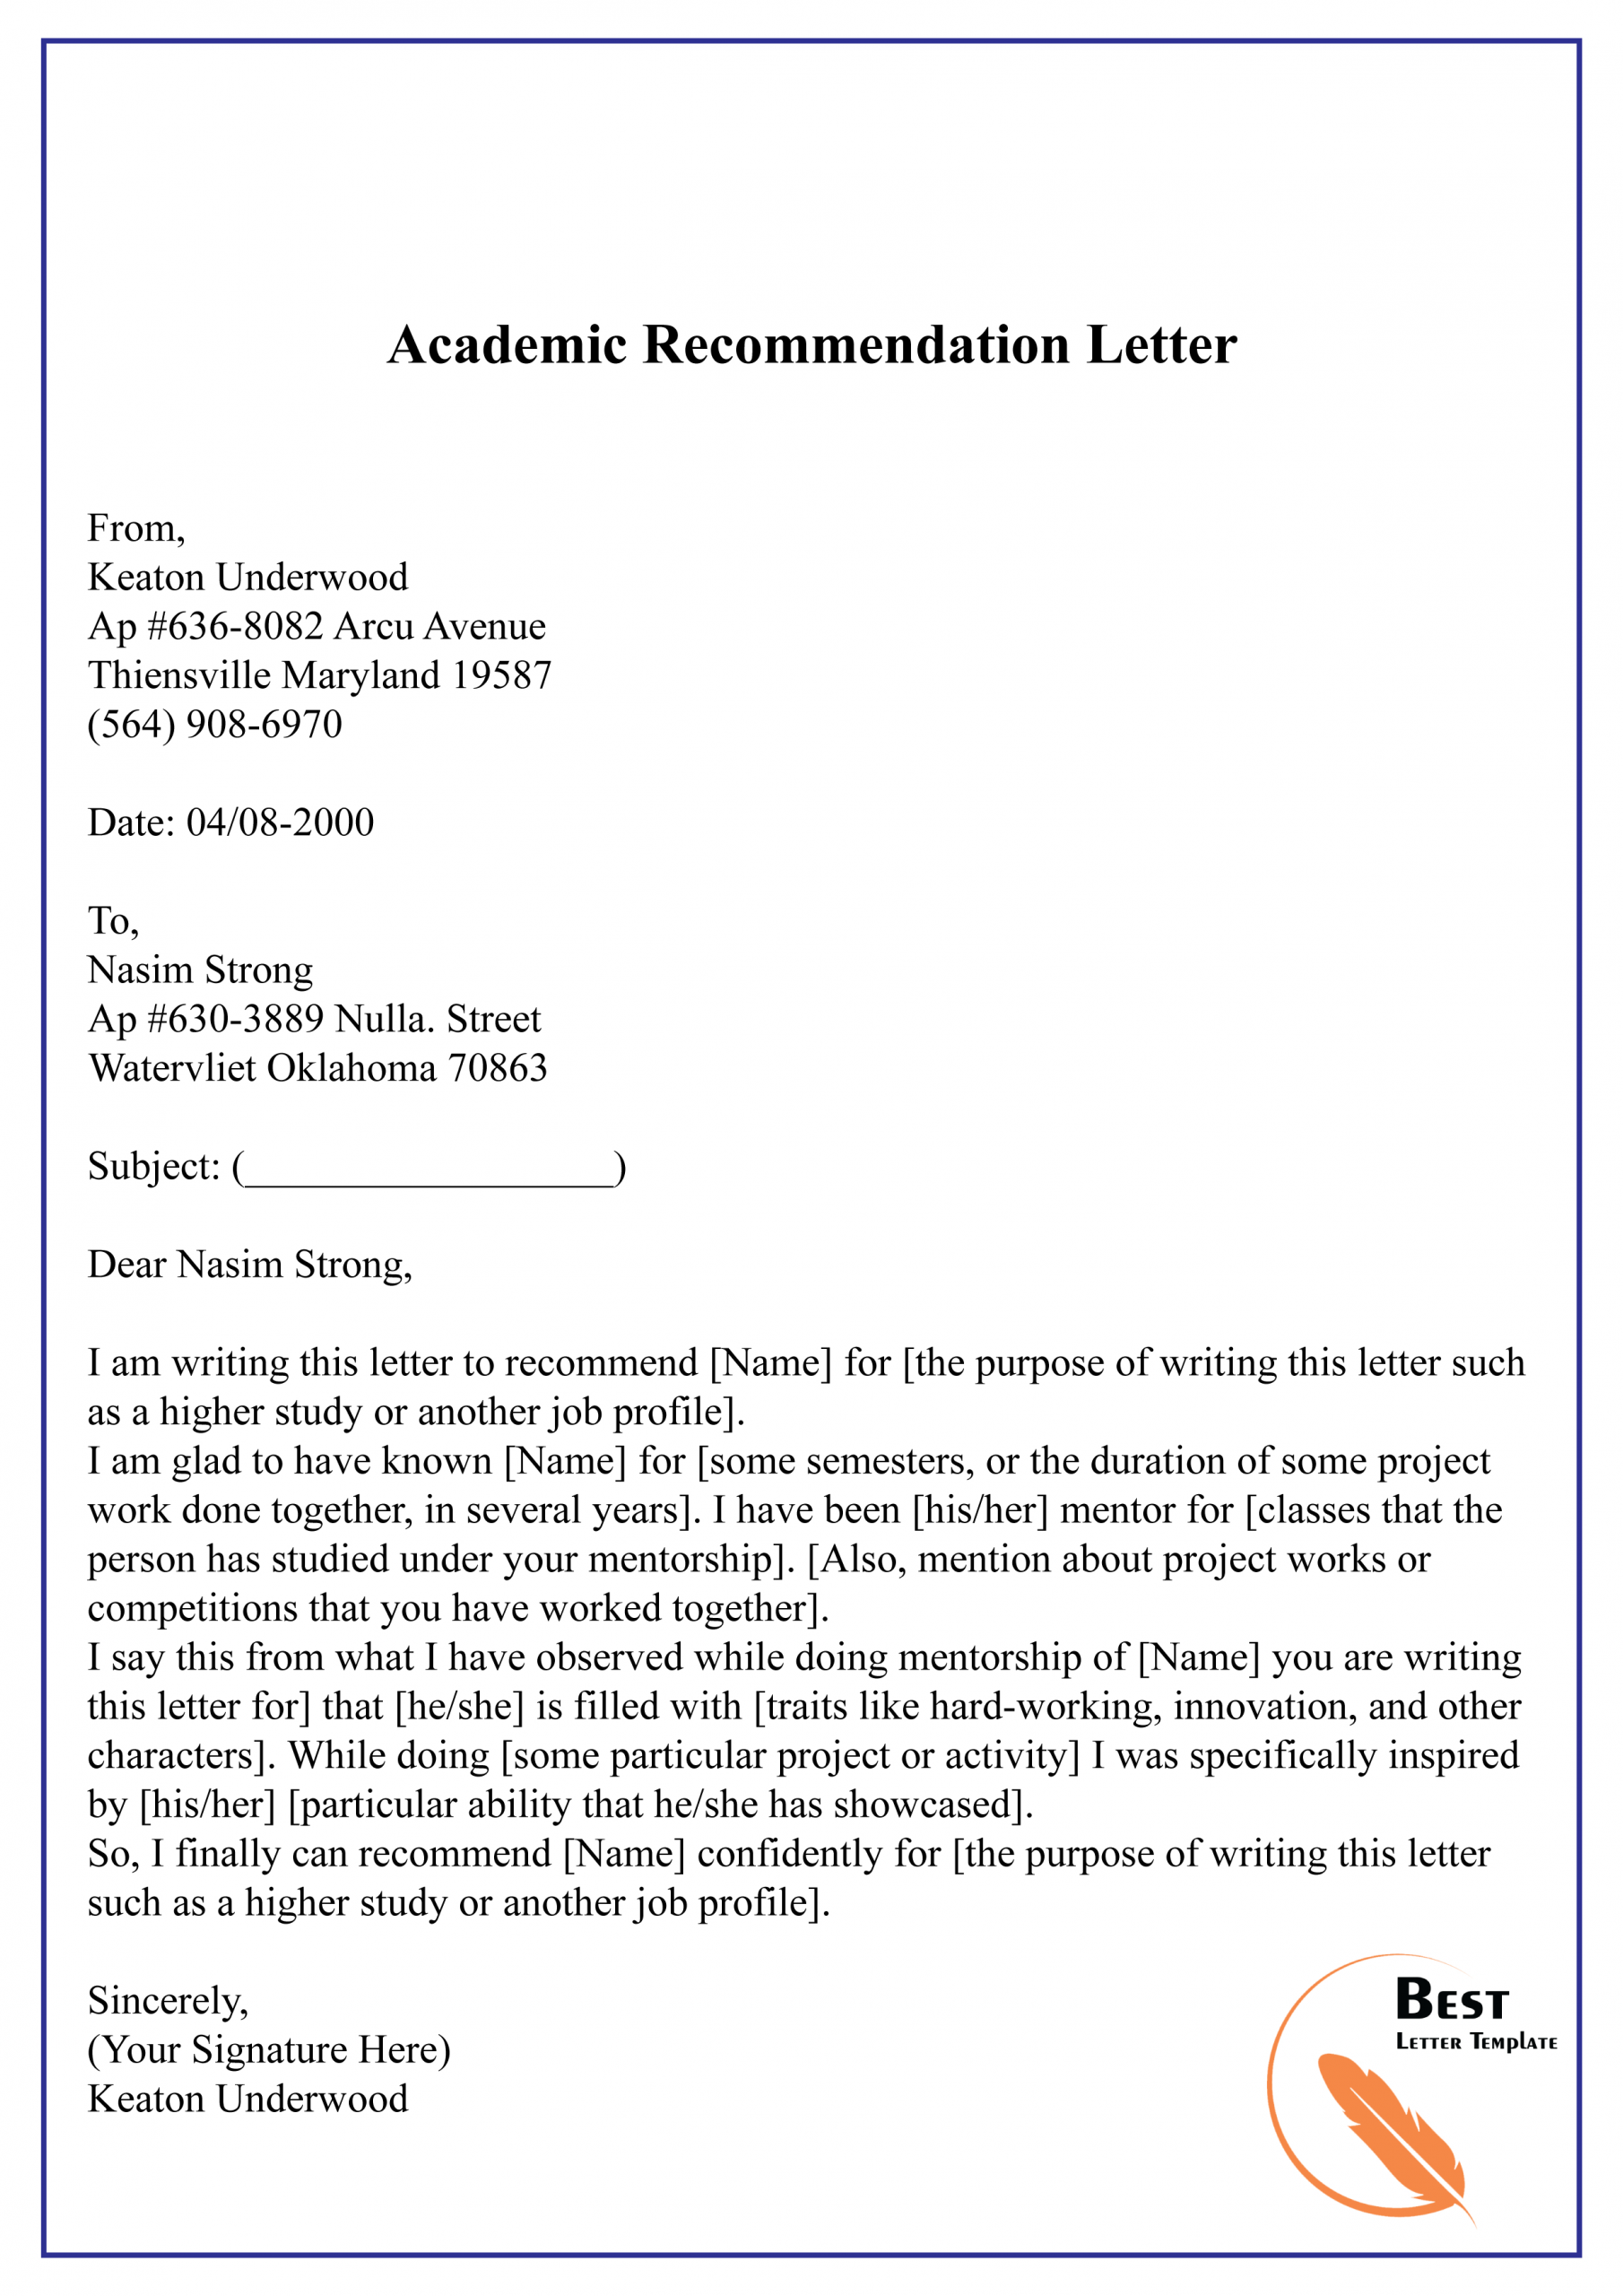 Academic Recommendation Letter 01 Best Letter Template Within Dimensions 2480 X 3508 Scaled 